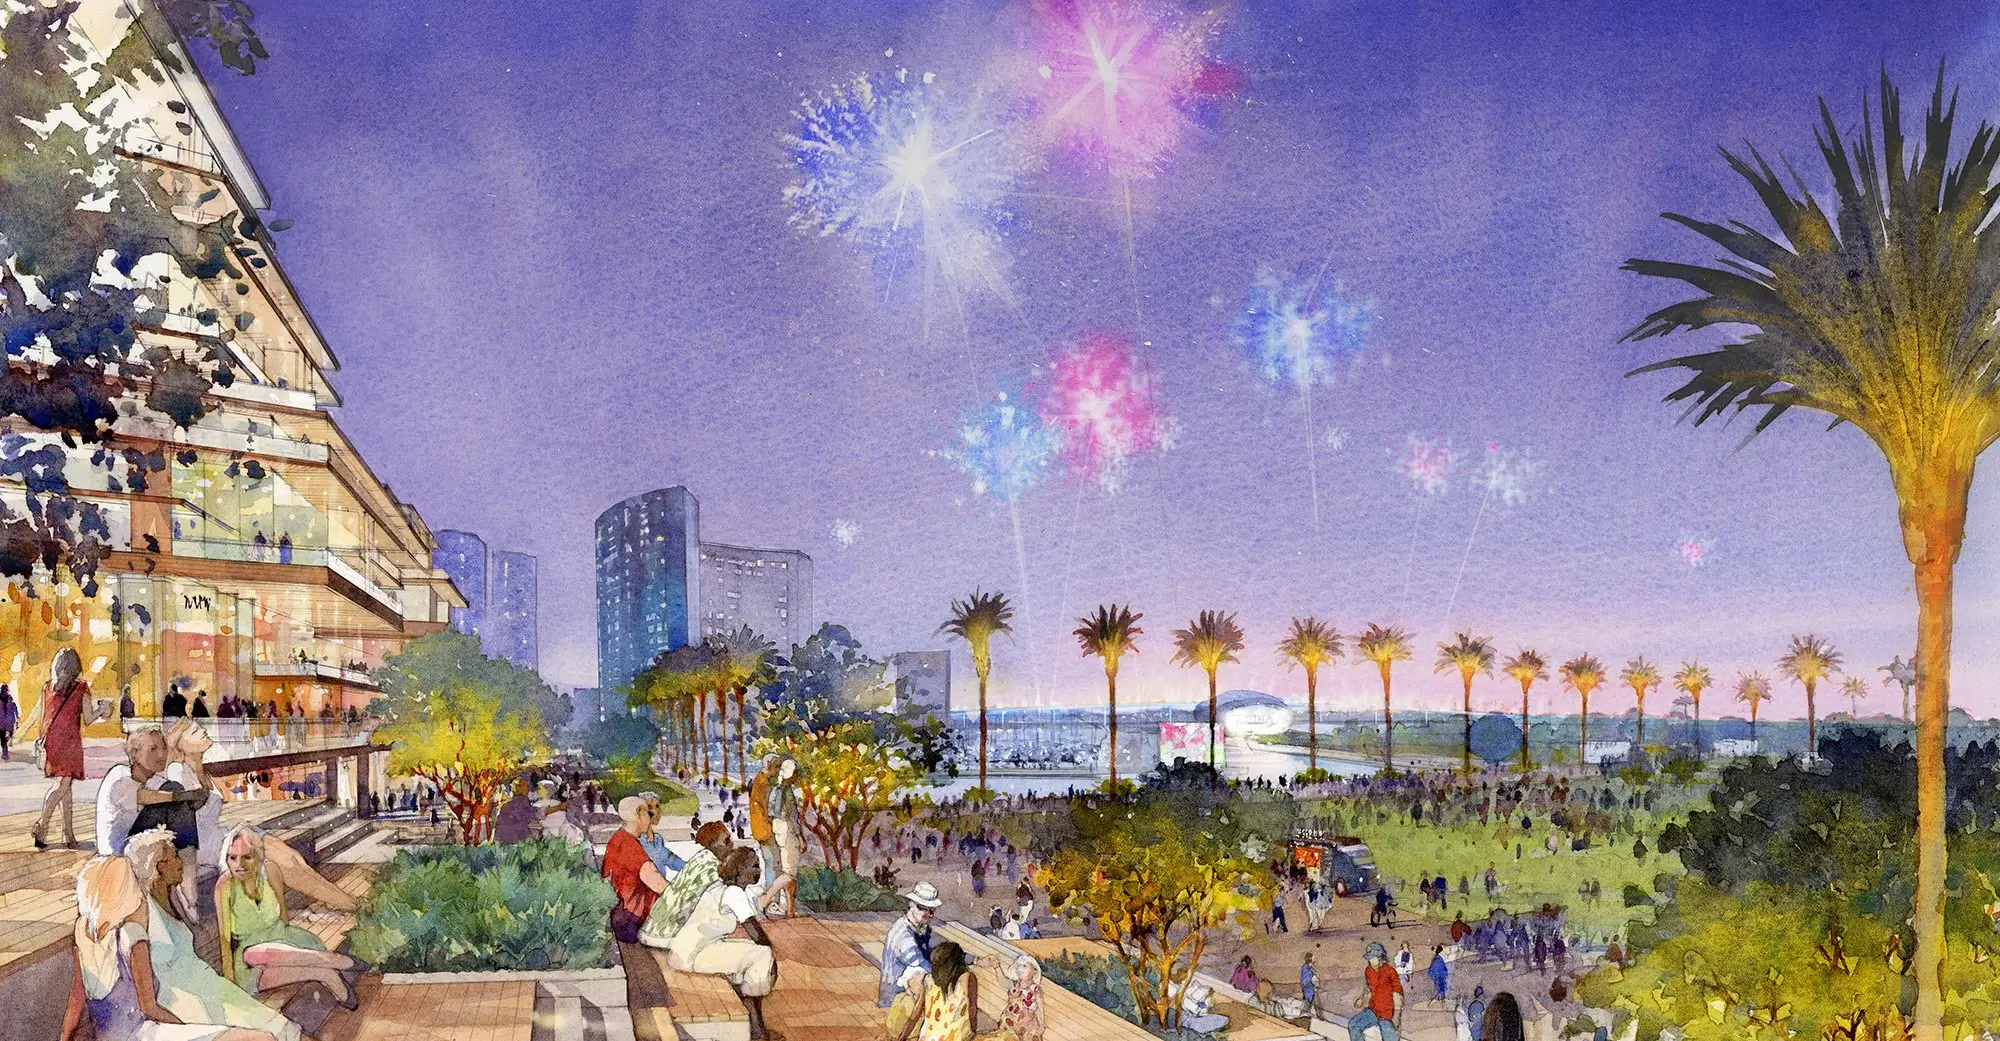 Artist rendering of fireworks going off in the bay, viewed from the boardwalk.